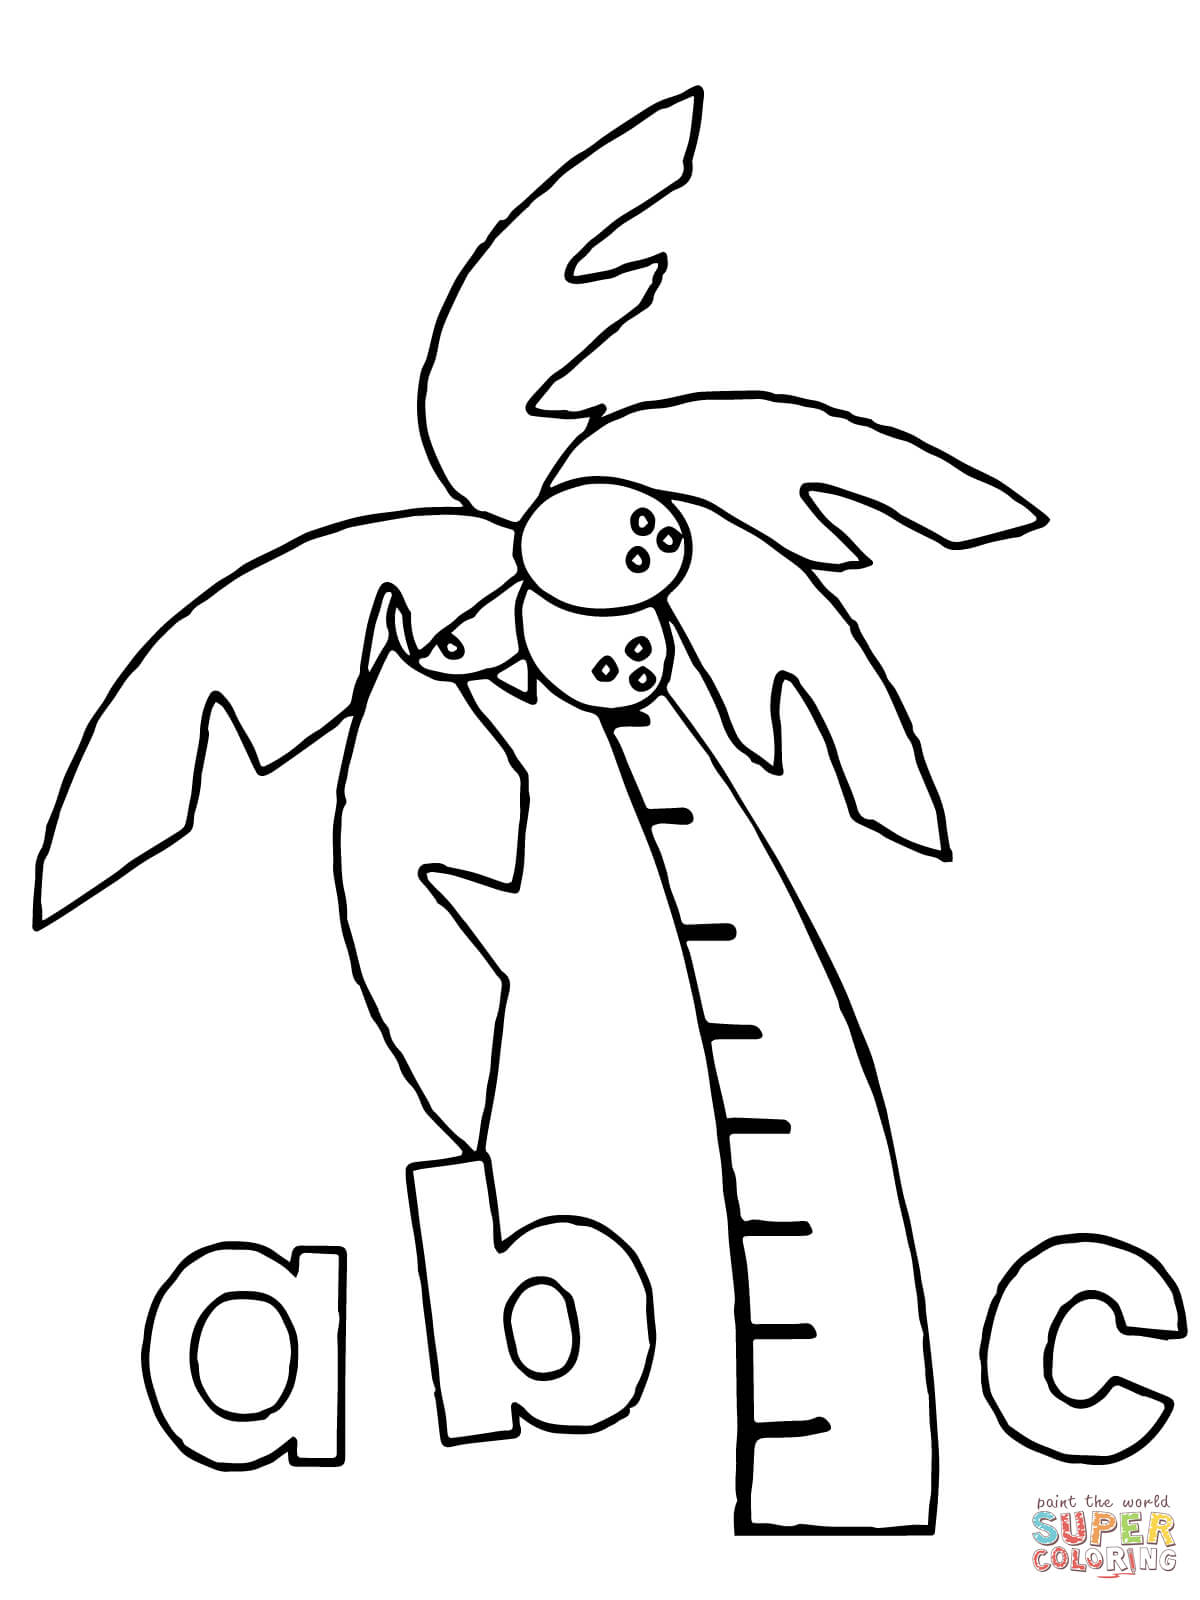 Free Chicka Chicka Boom Boom Coloring Pages Download Free Chicka Chicka Boom Boom Coloring